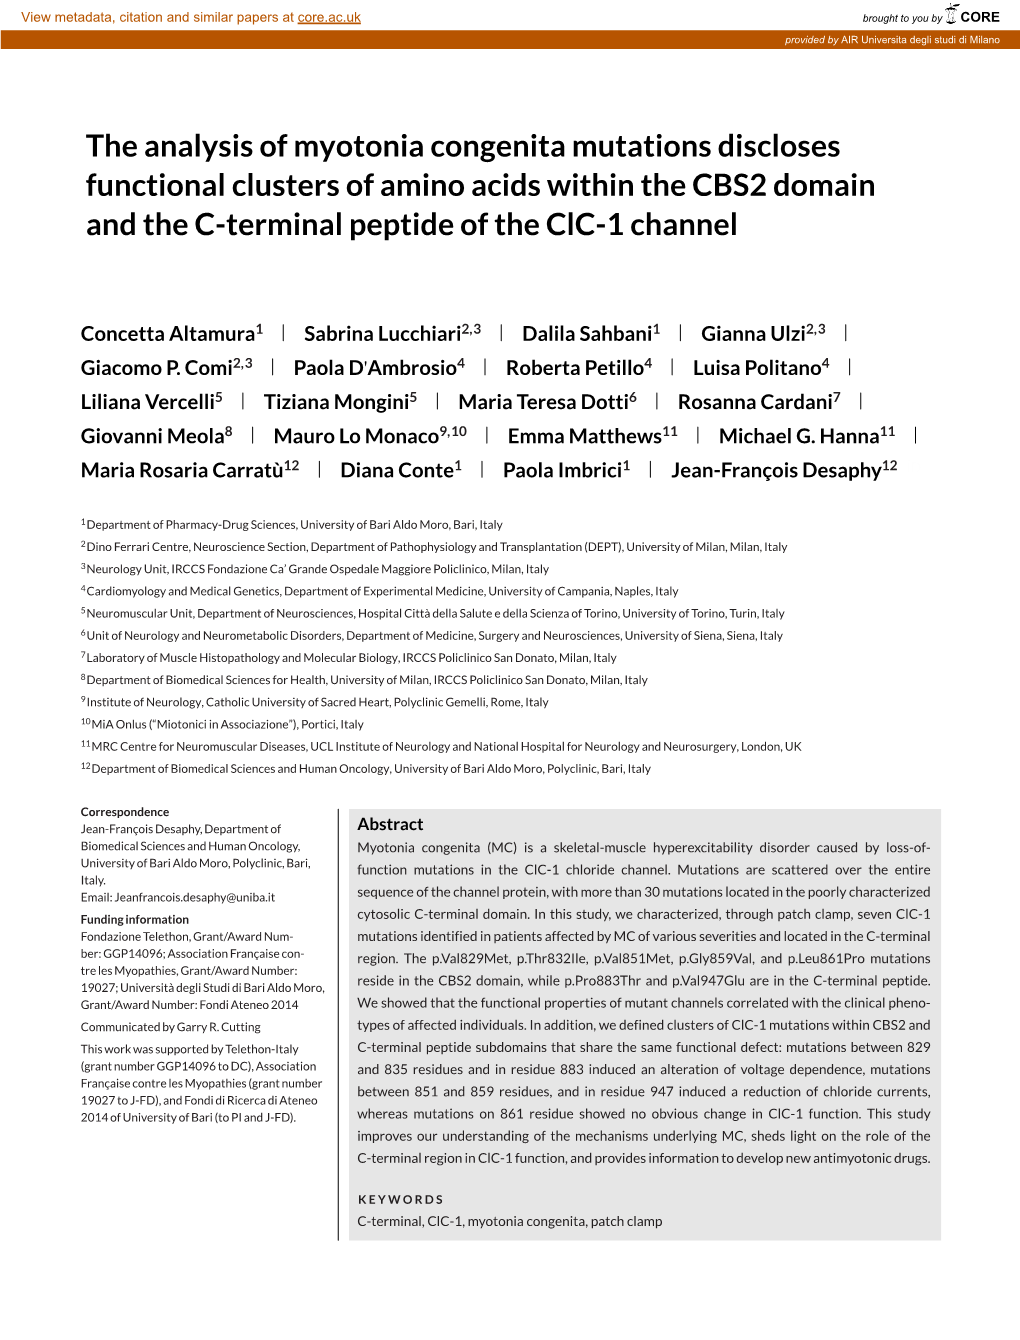 The Analysis of Myotonia Congenita Mutations Discloses Functional Clusters of Amino Acids Within the CBS2 Domain and the C-Terminal Peptide of the Clc-1 Channel